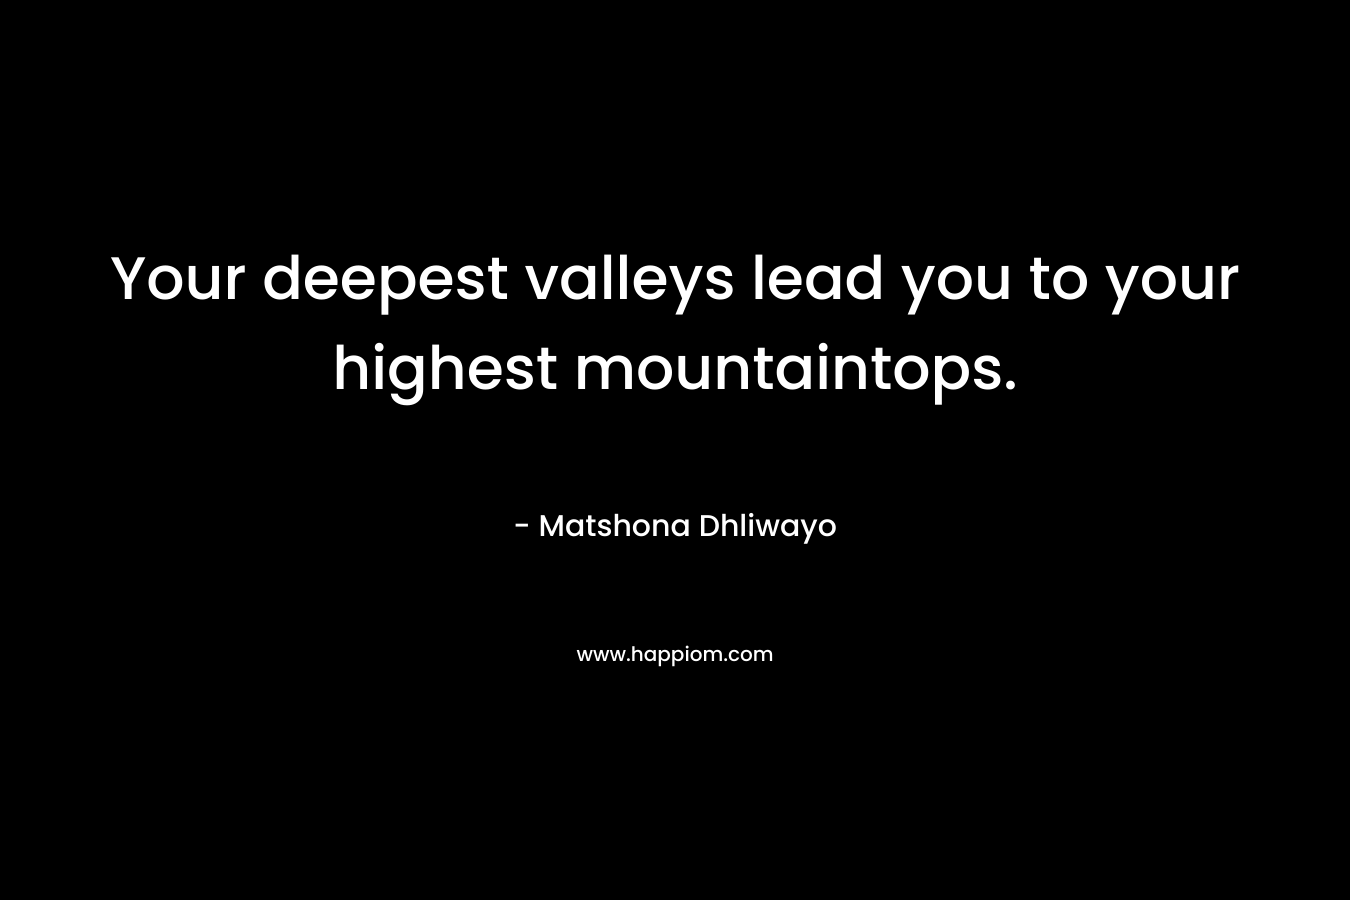 Your deepest valleys lead you to your highest mountaintops. – Matshona Dhliwayo